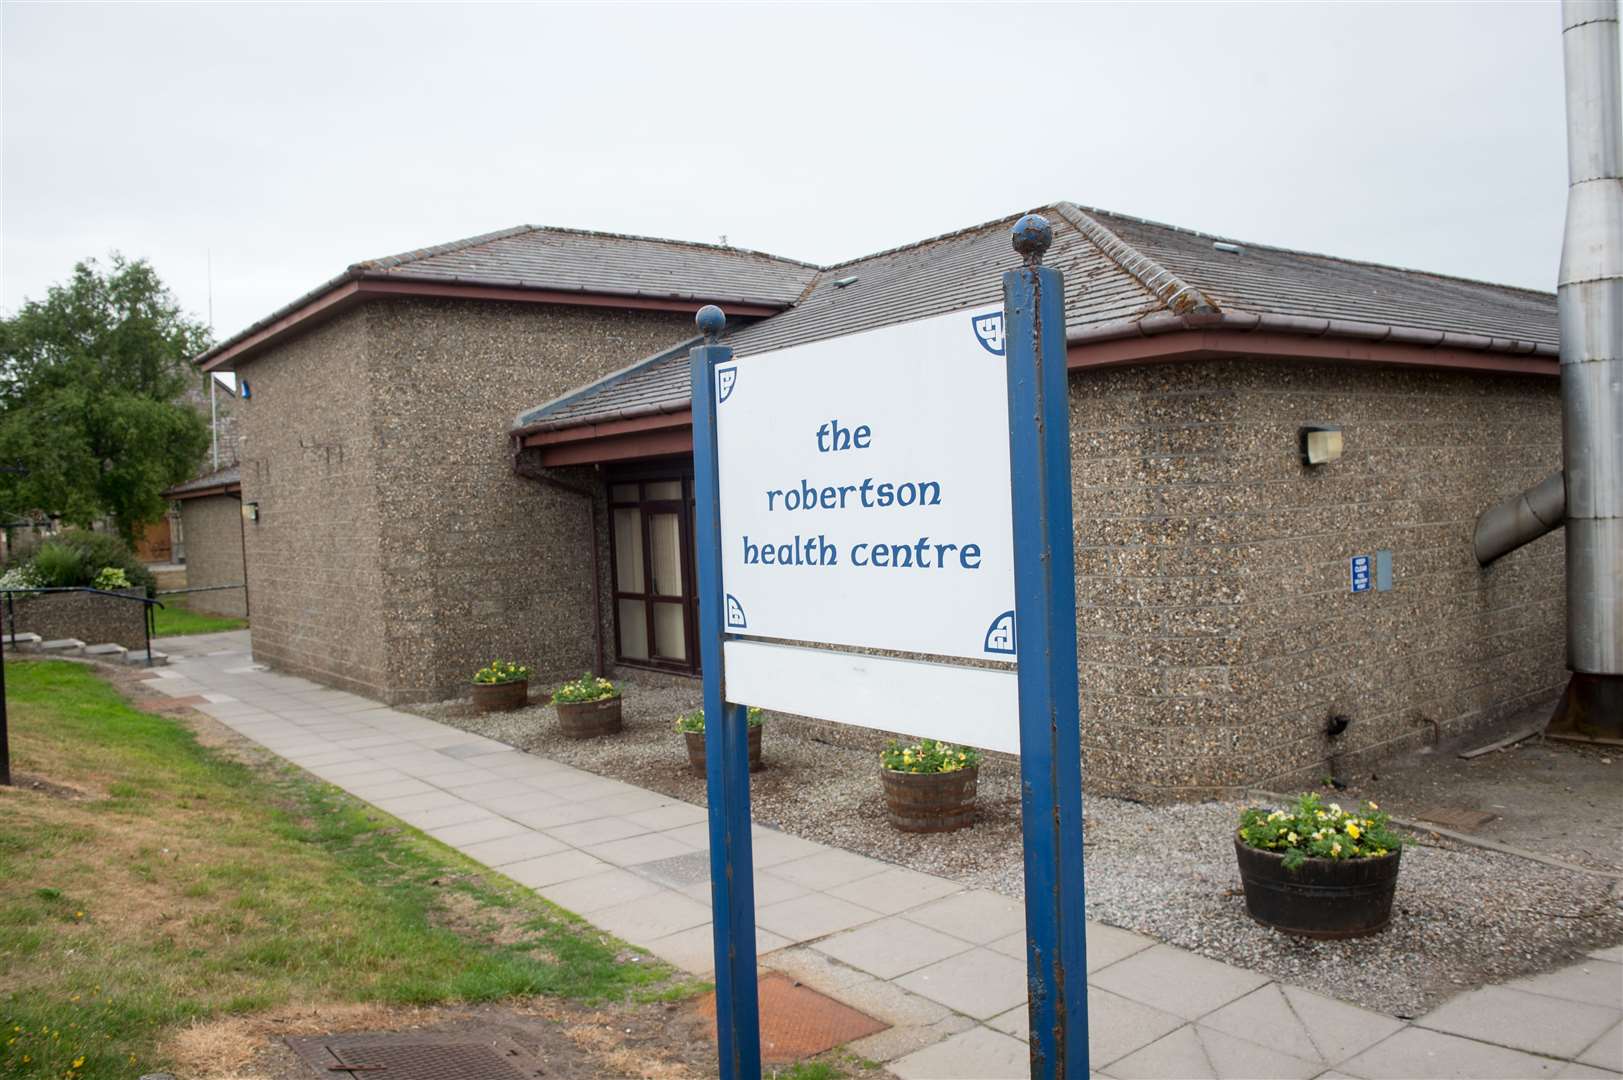 The practice works out of the Robertson Health Centre in Alness.